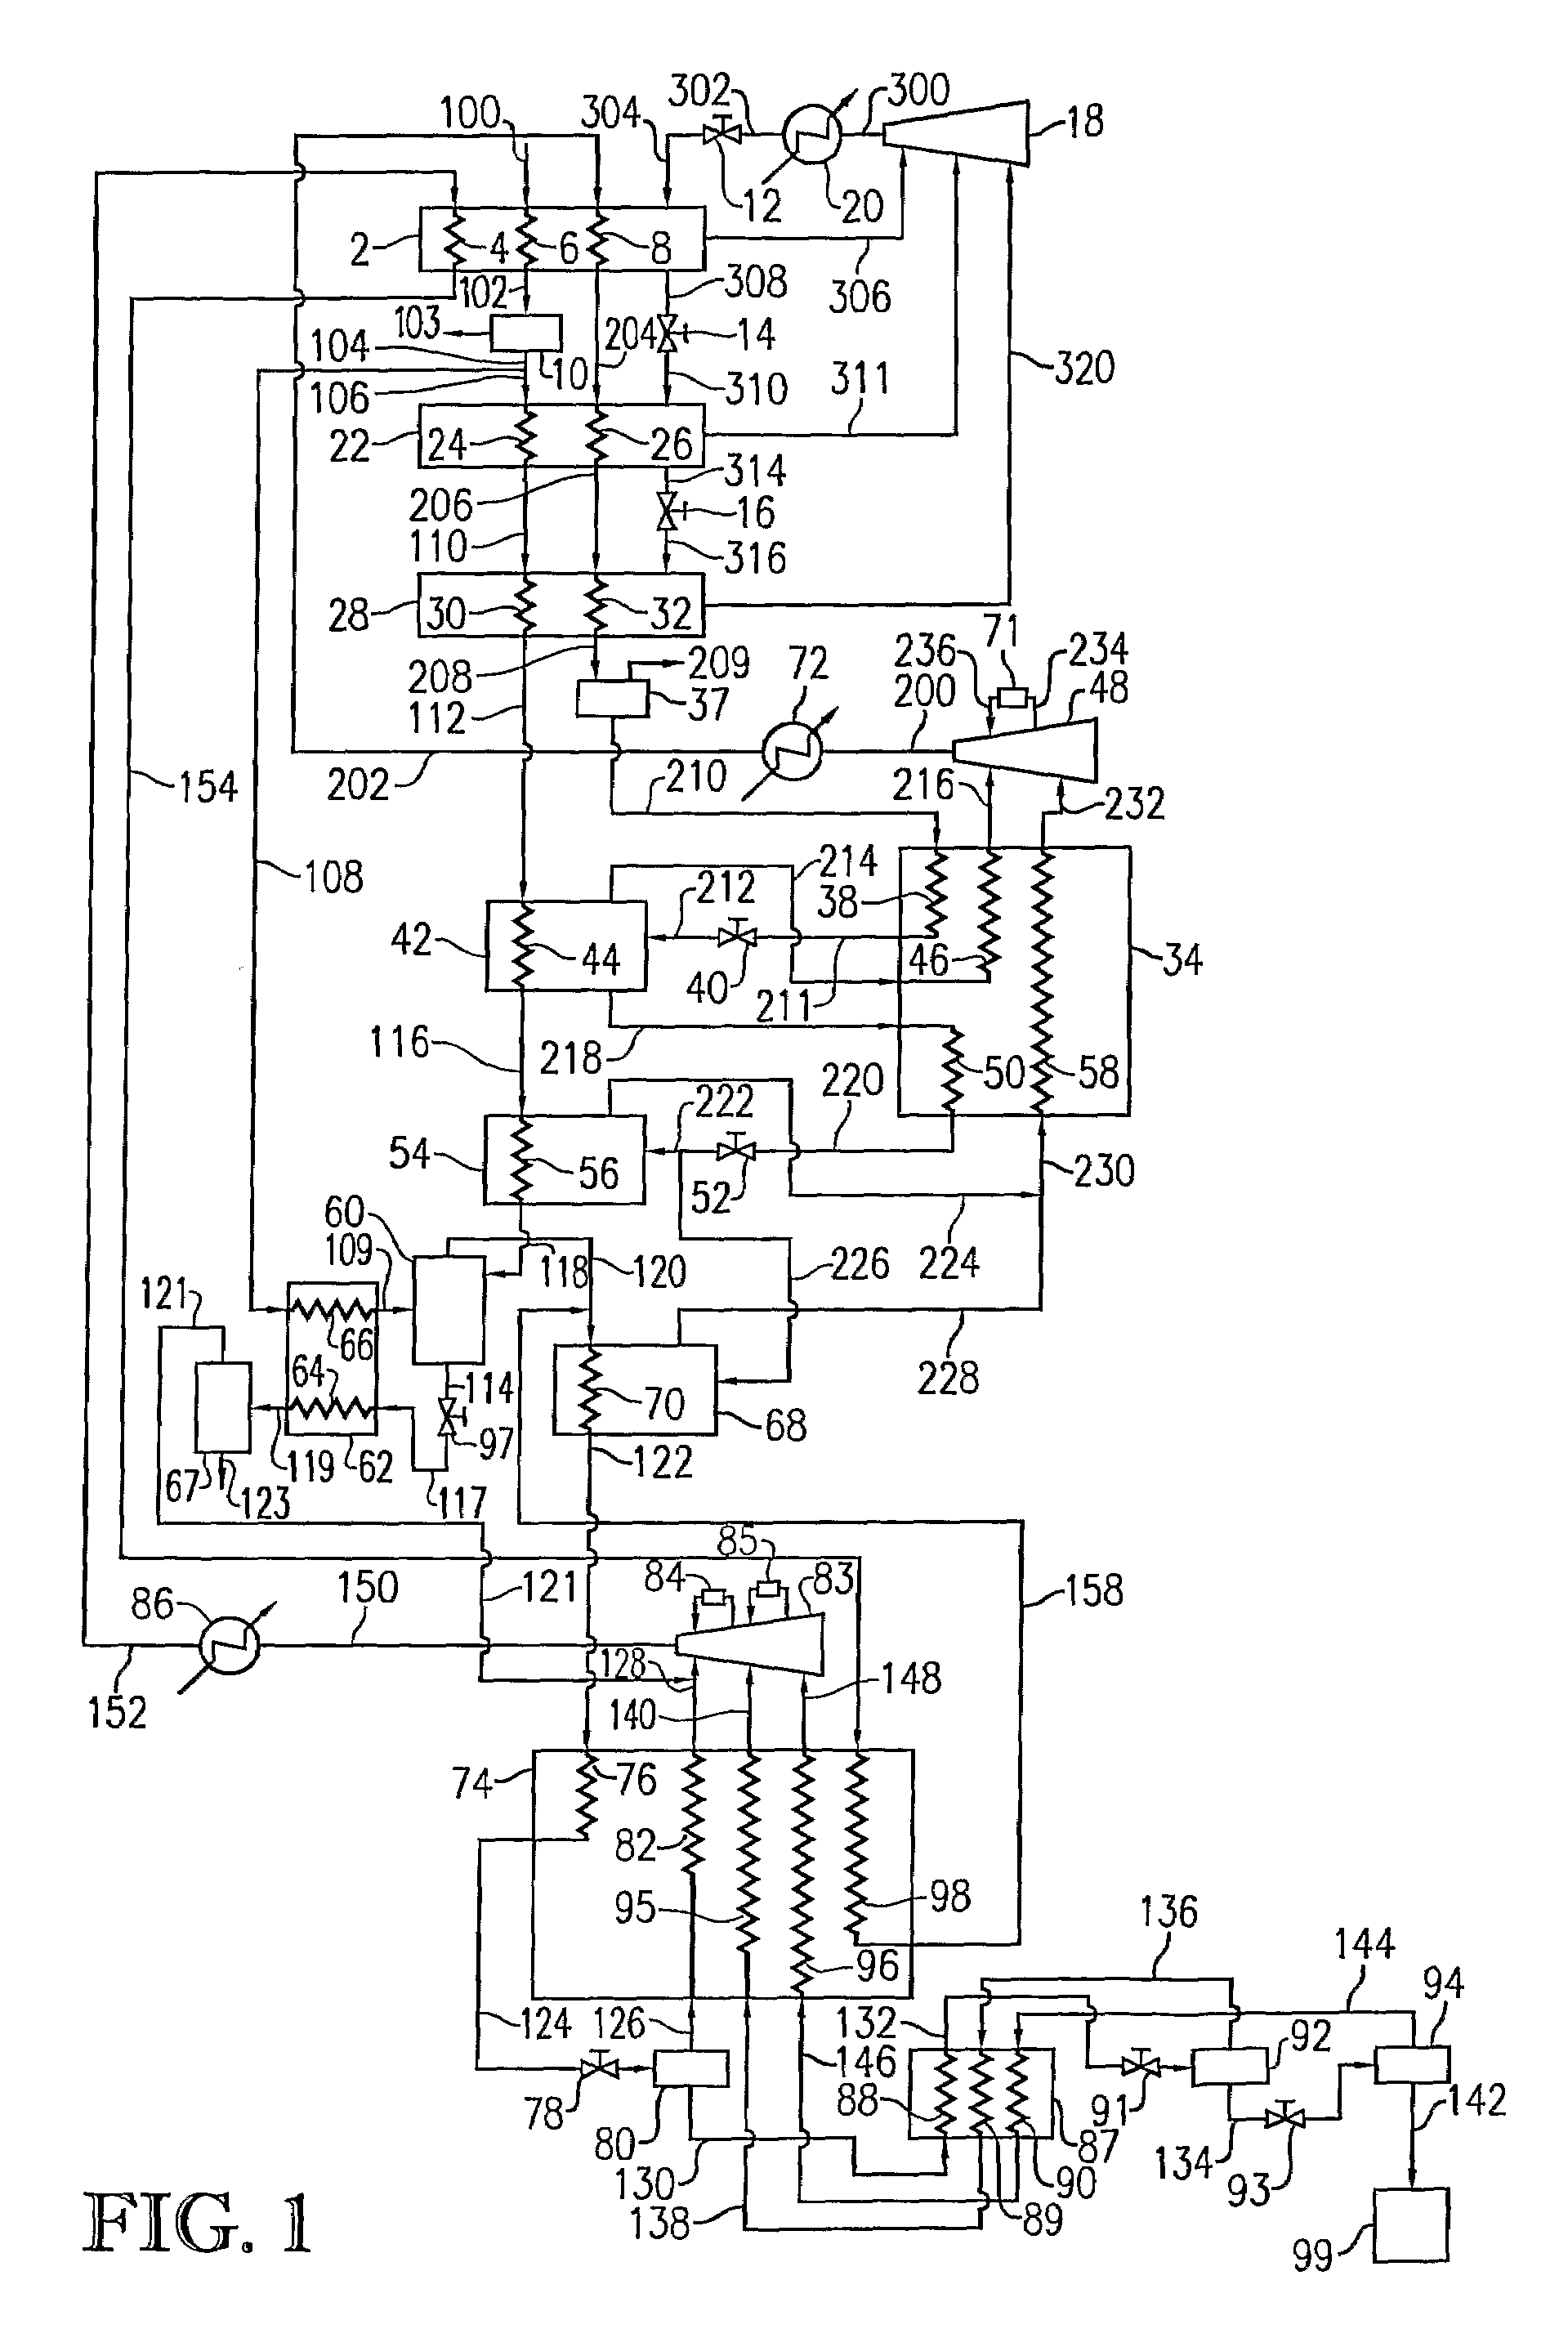 LNG system with enhanced pre-cooling cycle